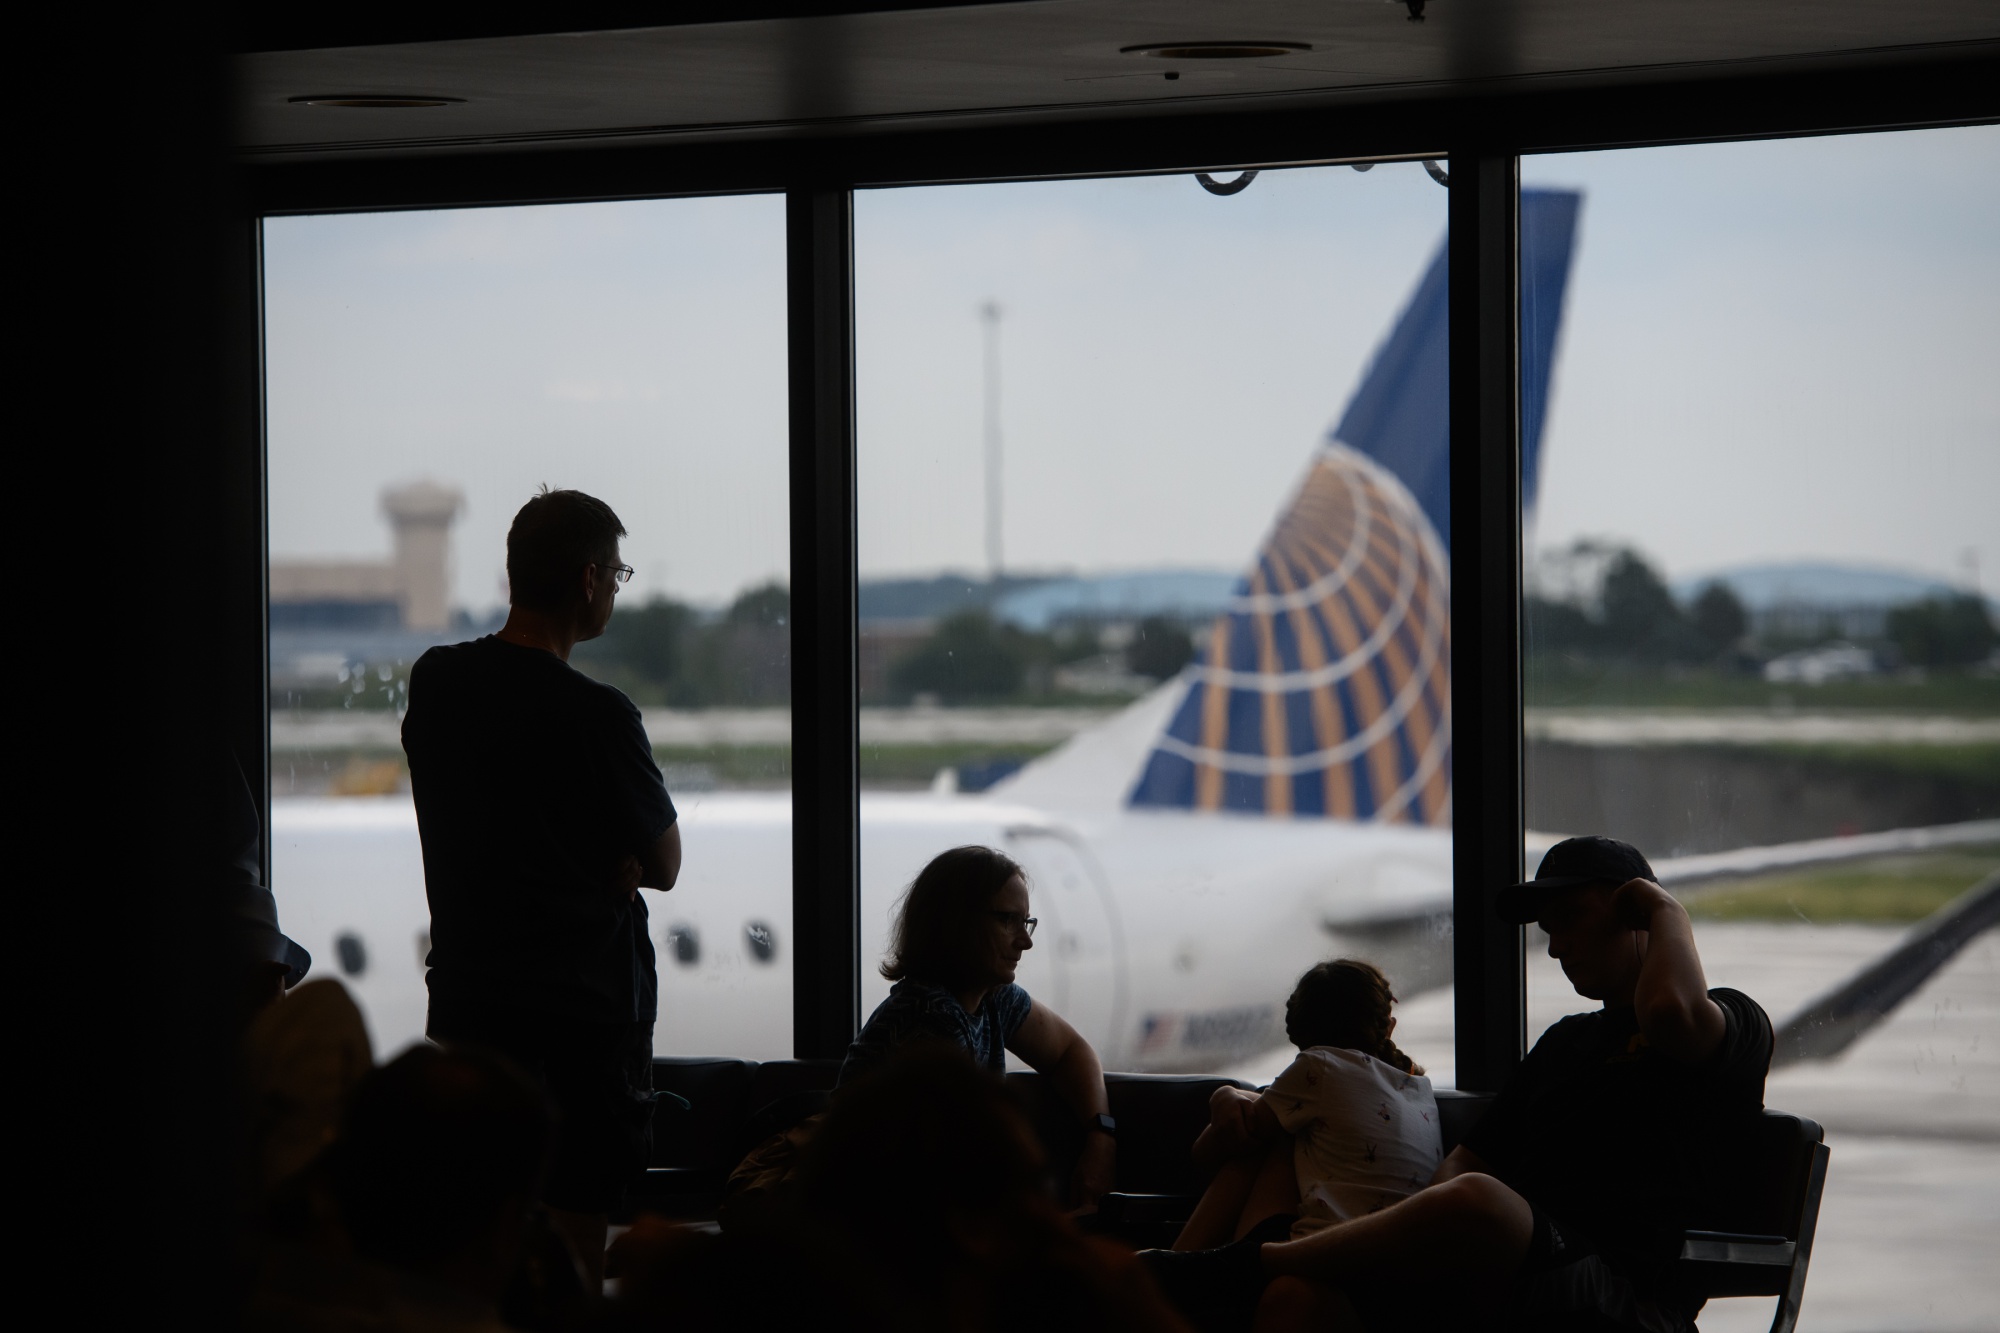 People watch as a United Airlines&nbsp;plane arrives at a gate at the Pittsburgh International Airport&nbsp;in Moon Township, Pennsylvania.